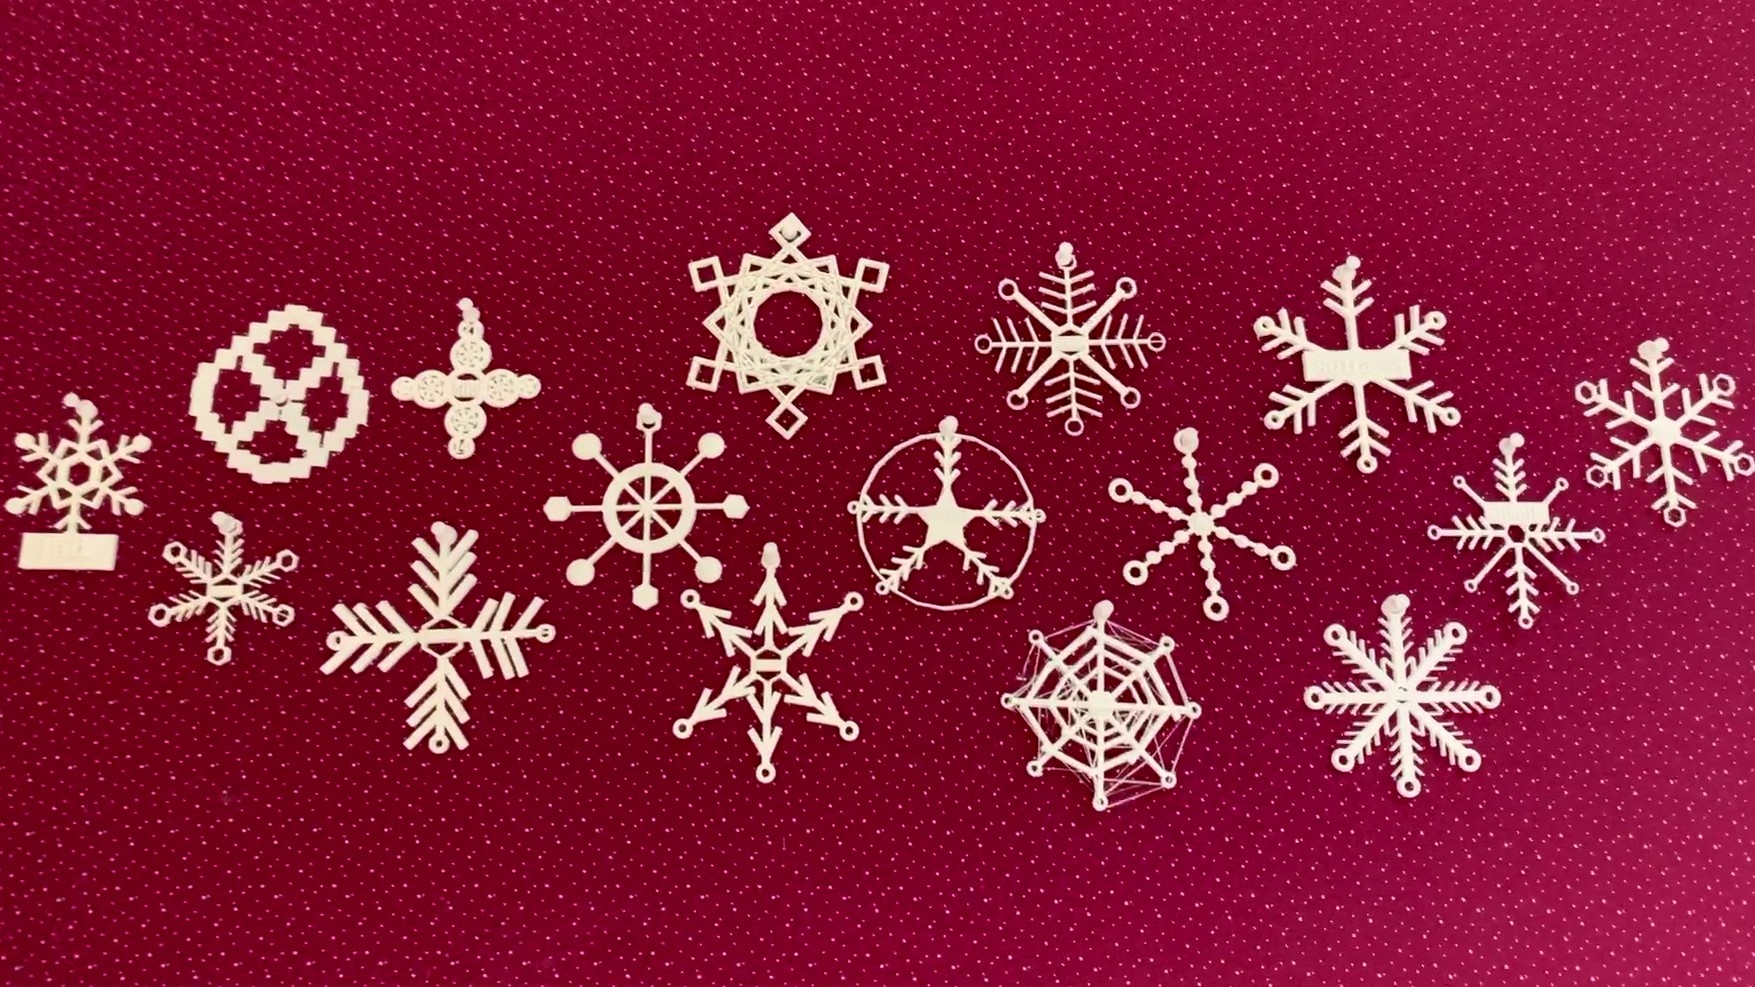 3D snowflakes on a red cloth display board